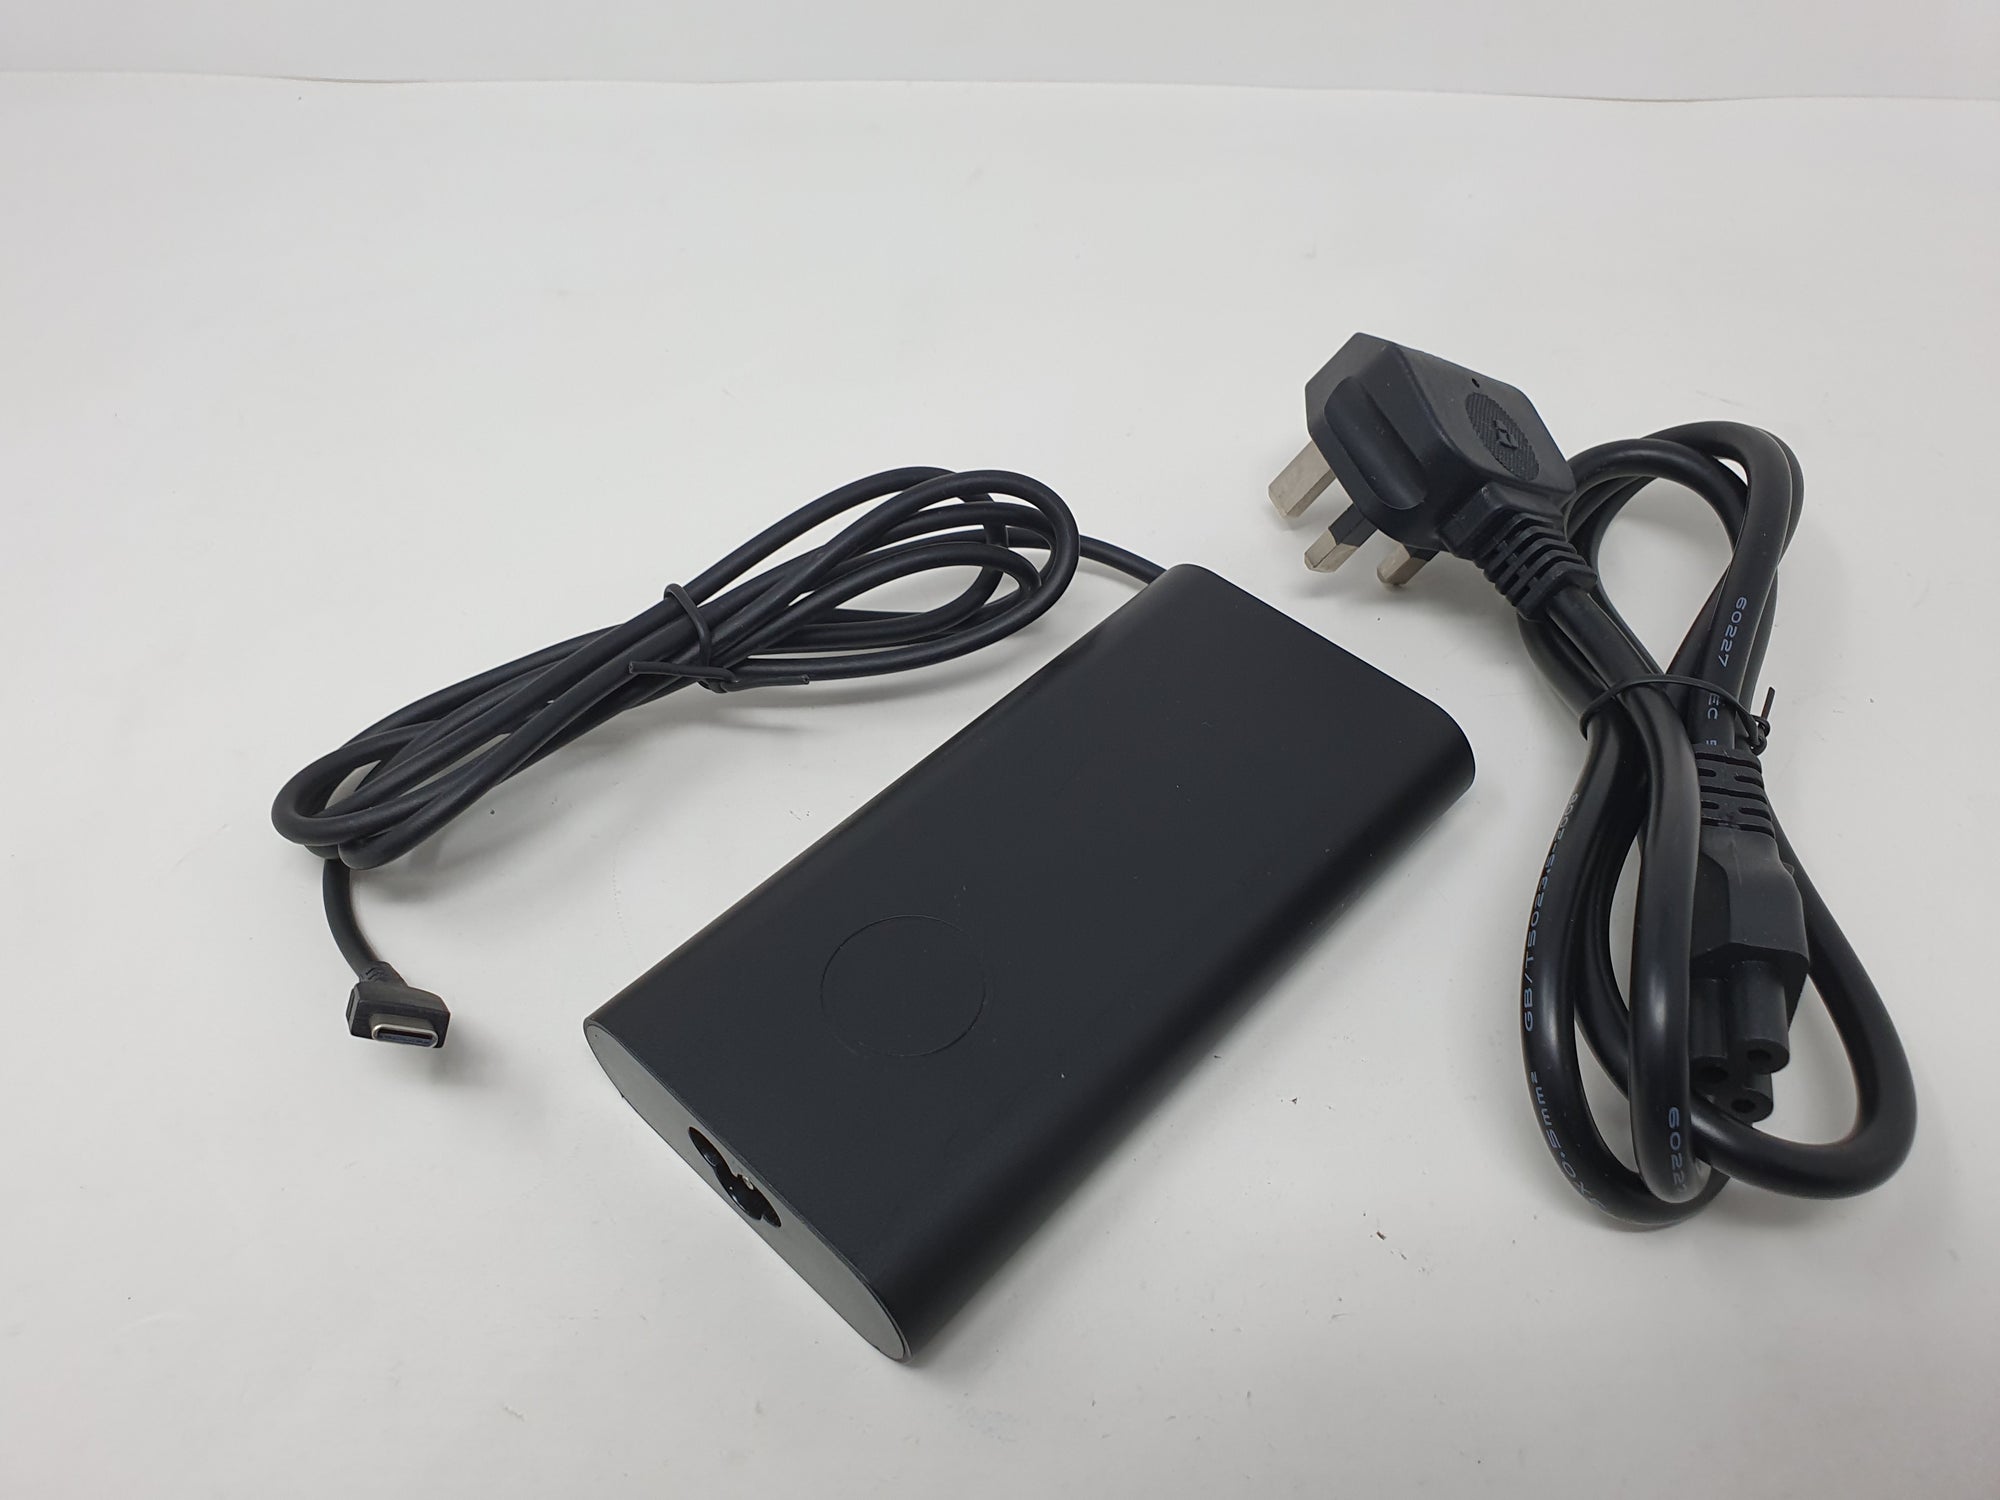 USB C Type-C Laptop Charger Power Supply Adapter for ASUS Laptop